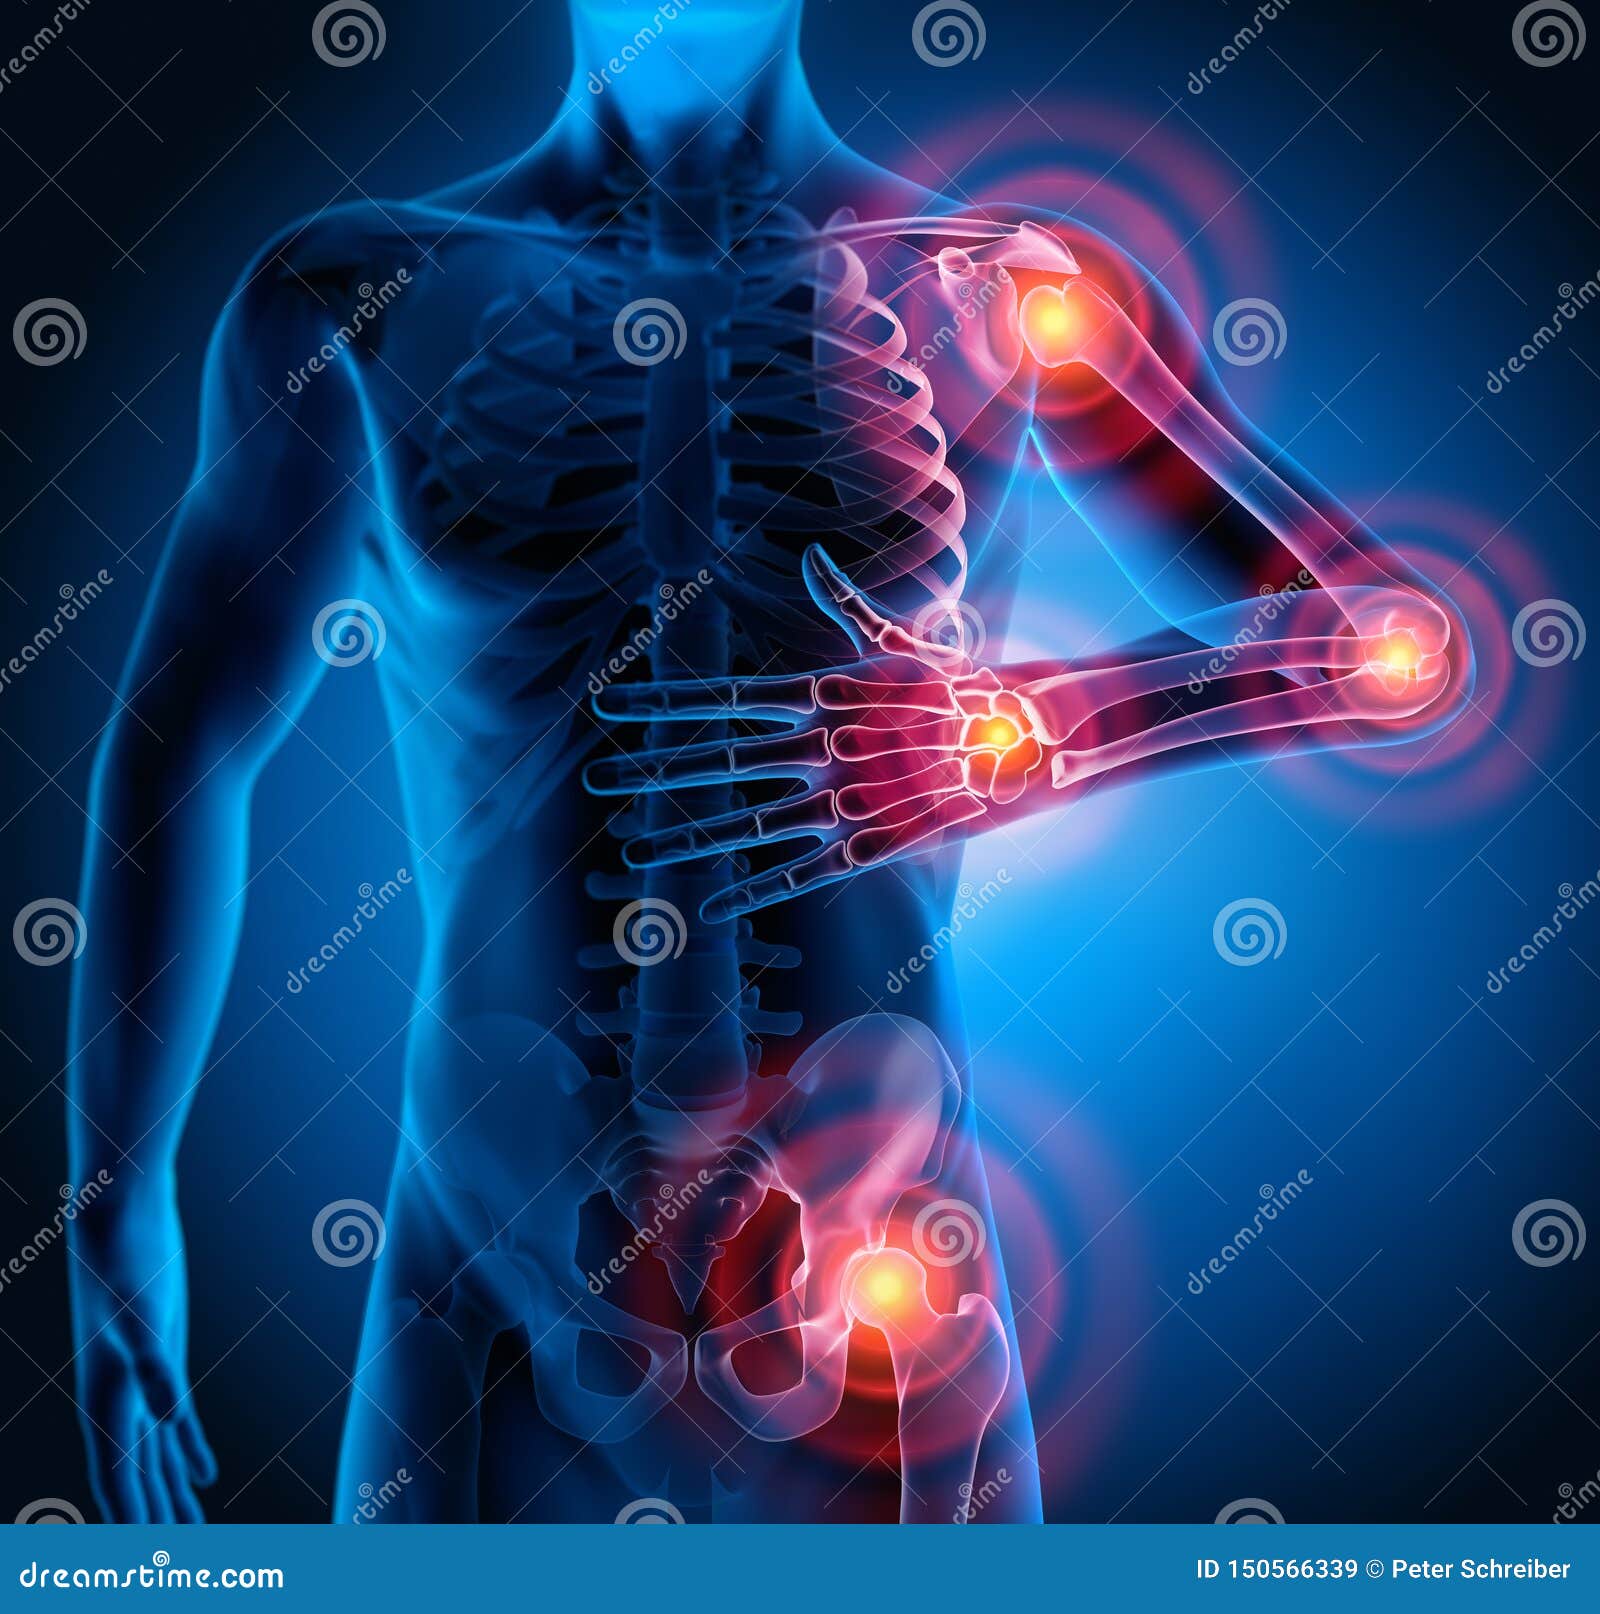 man with heavy joint pain symptoms